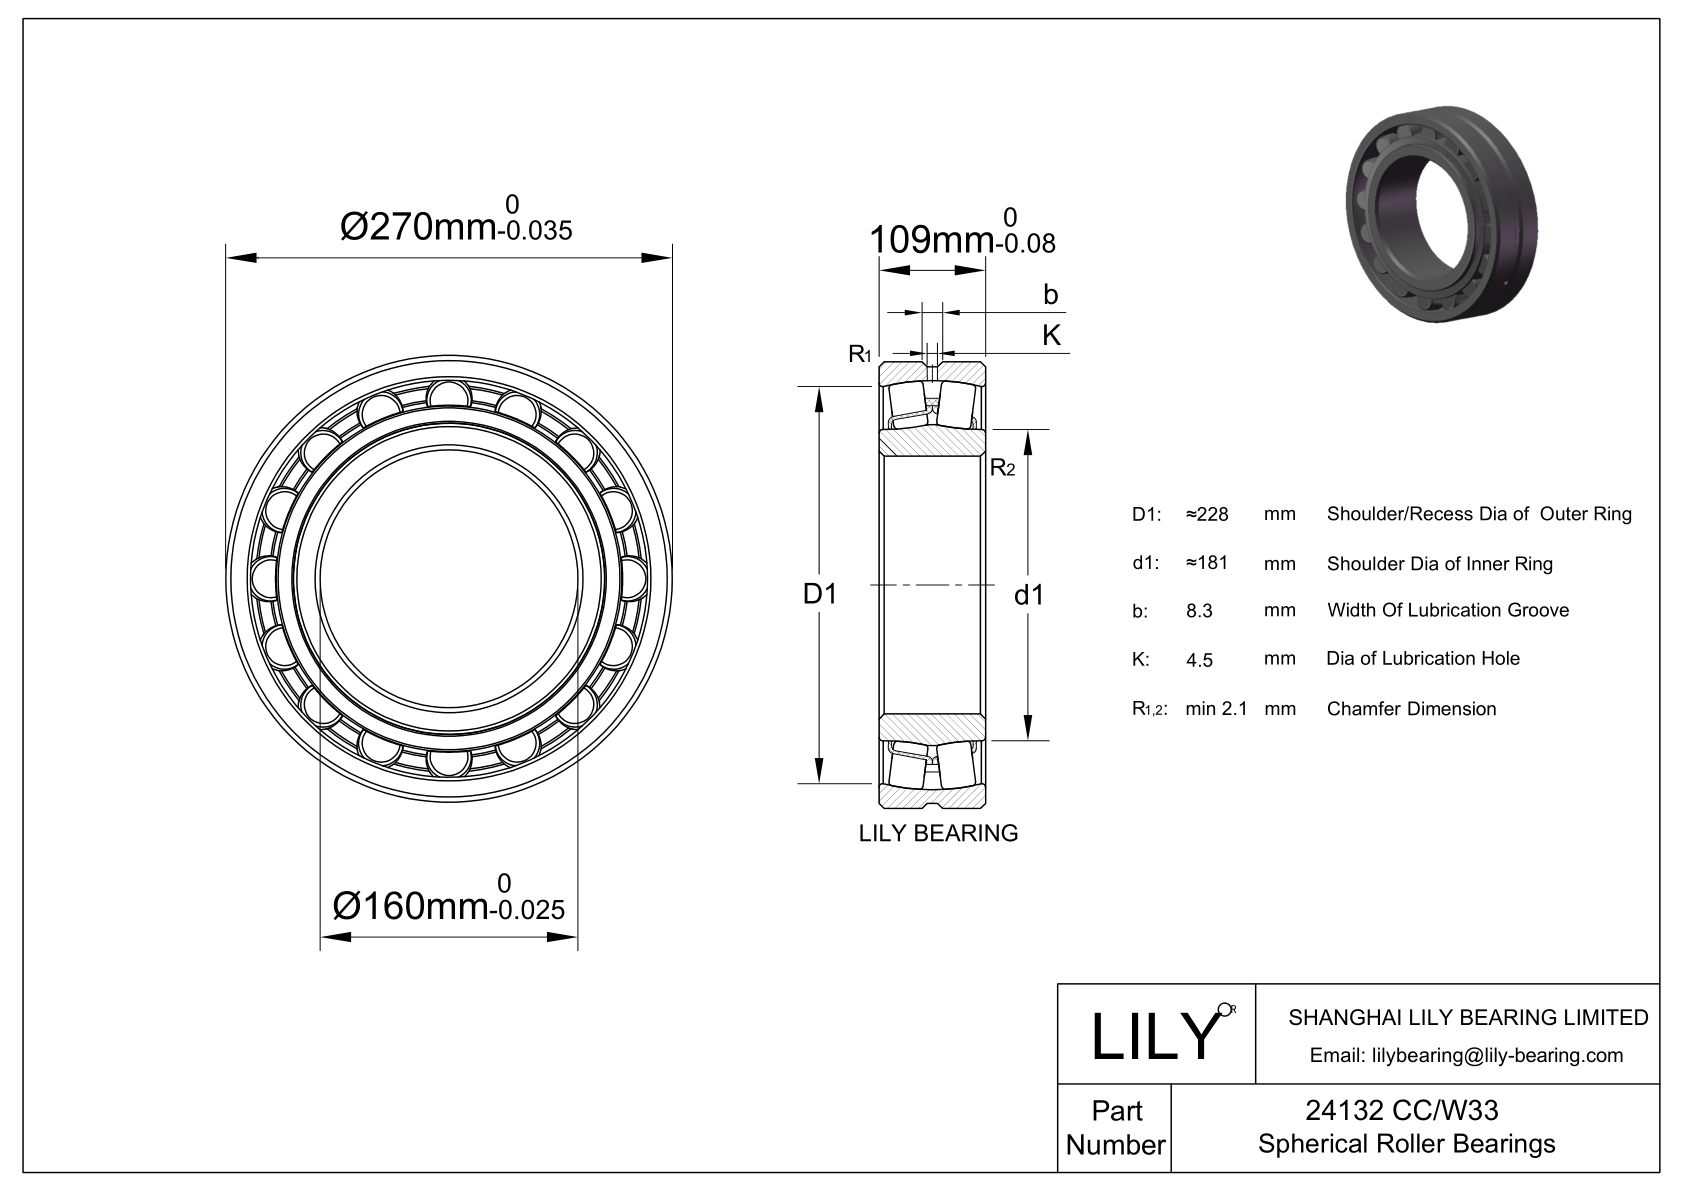 24132 CC/W33 Double Row Spherical Roller Bearing cad drawing